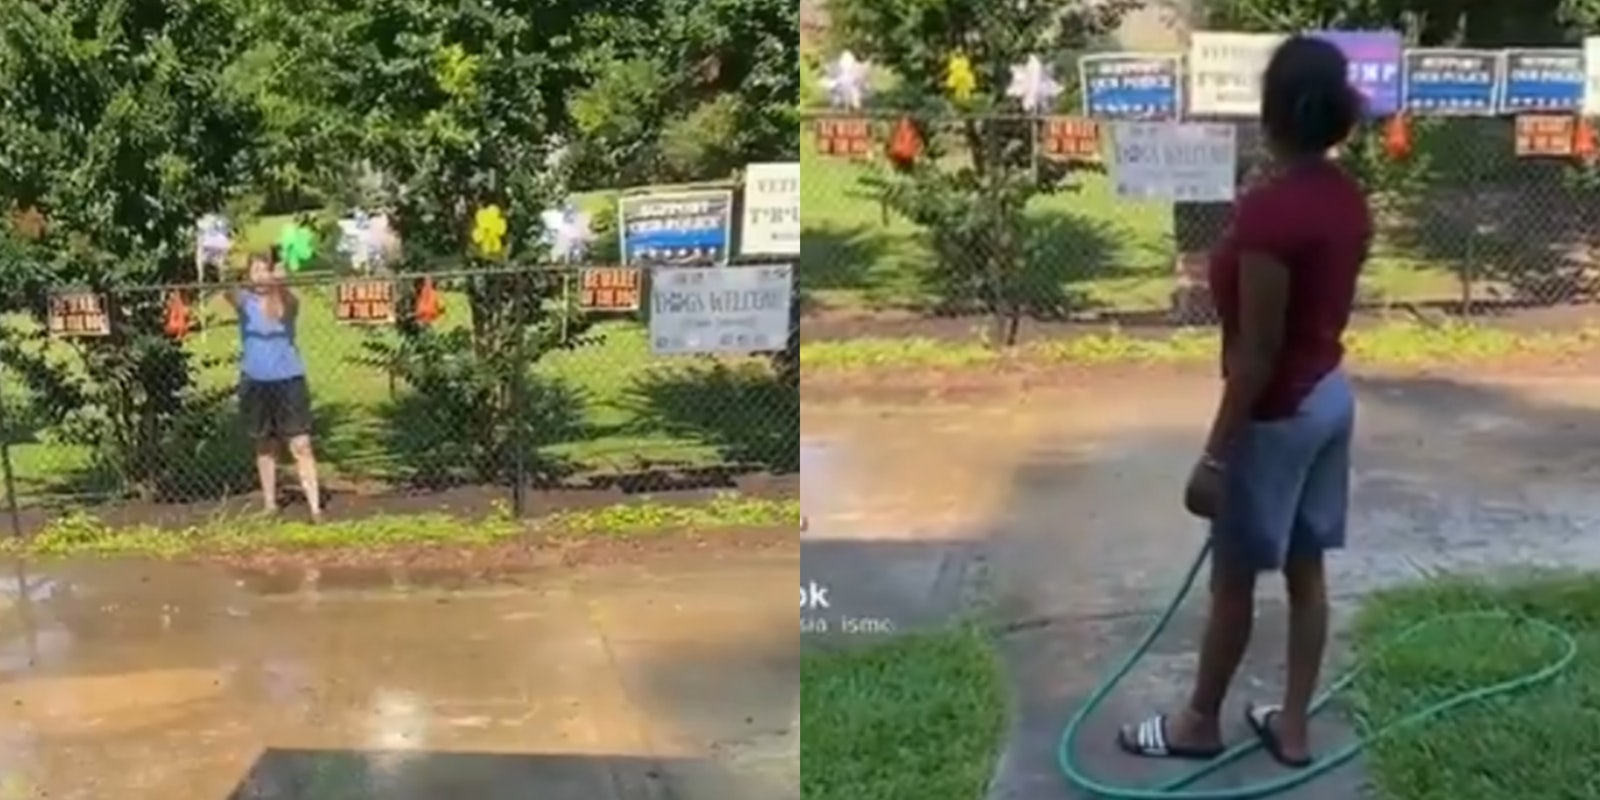 woman behind fence covered in Trump and Beware of Dog signs giving neighbor the finger (l) woman standing holding hose (r)